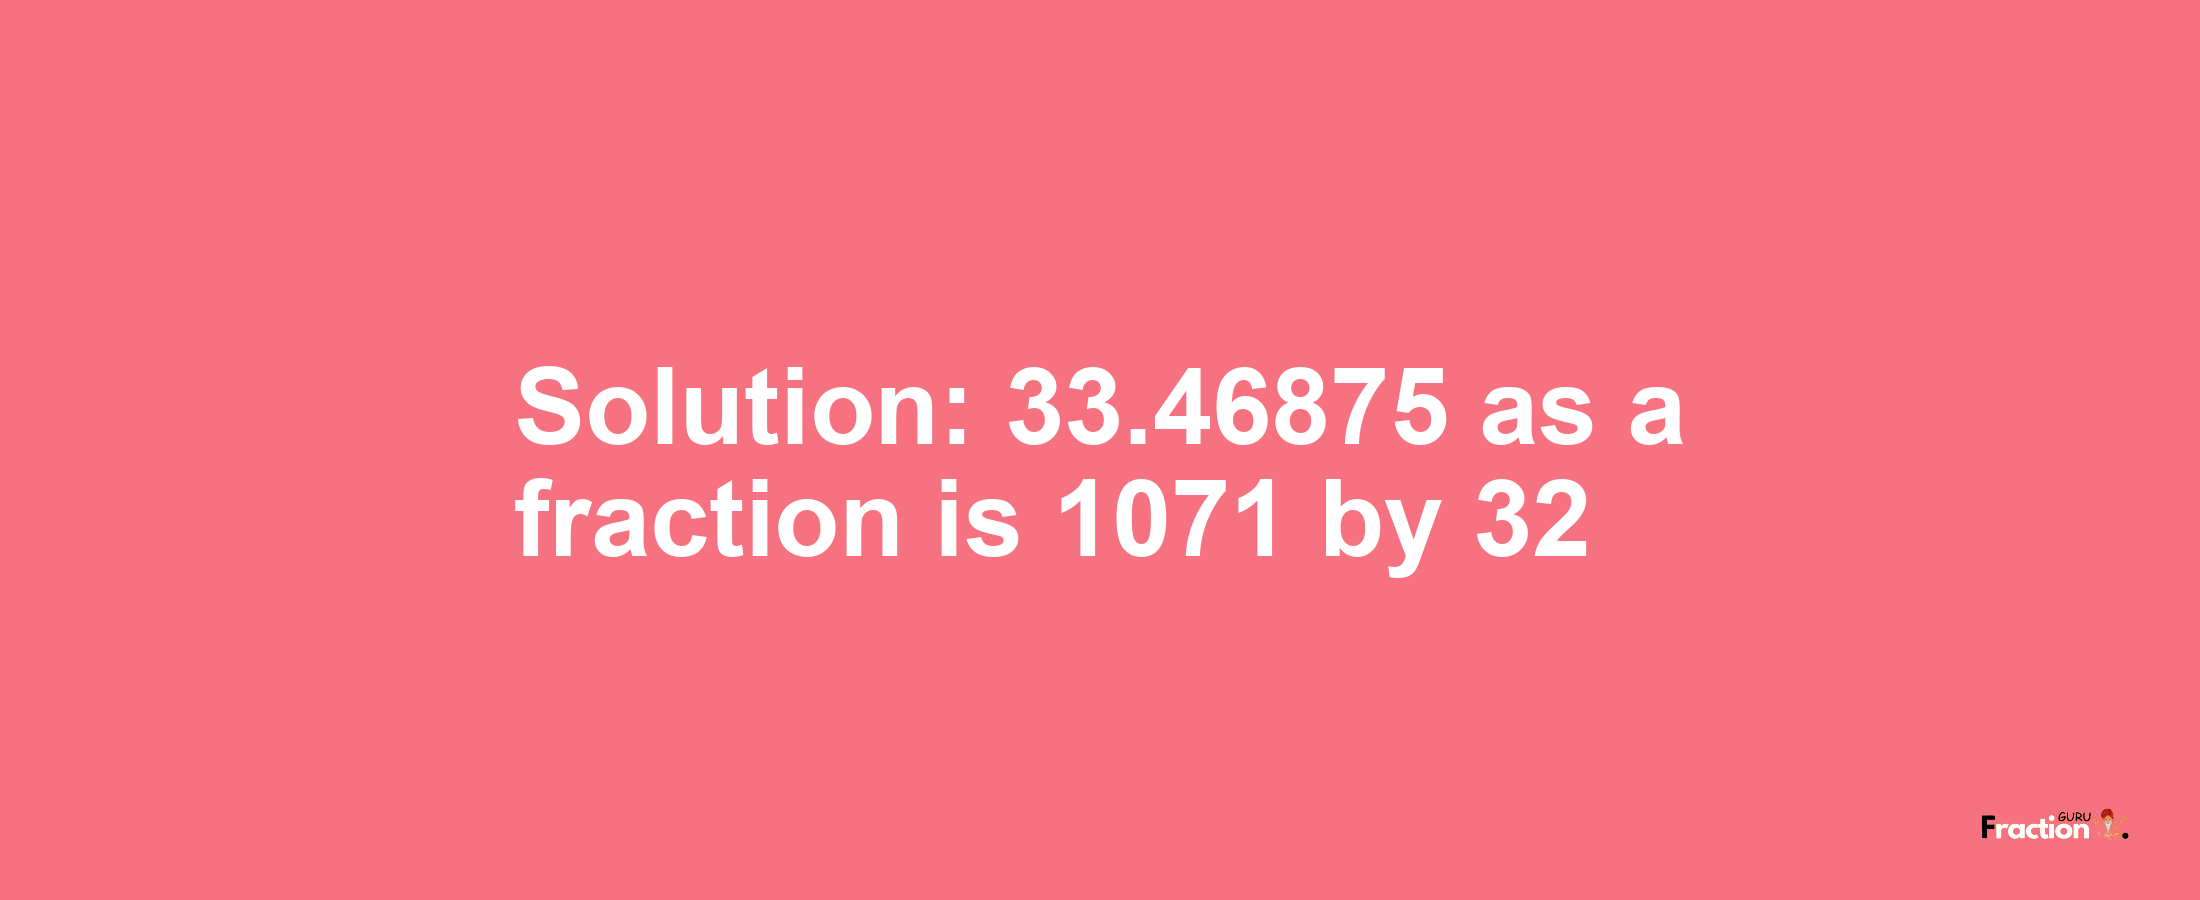 Solution:33.46875 as a fraction is 1071/32